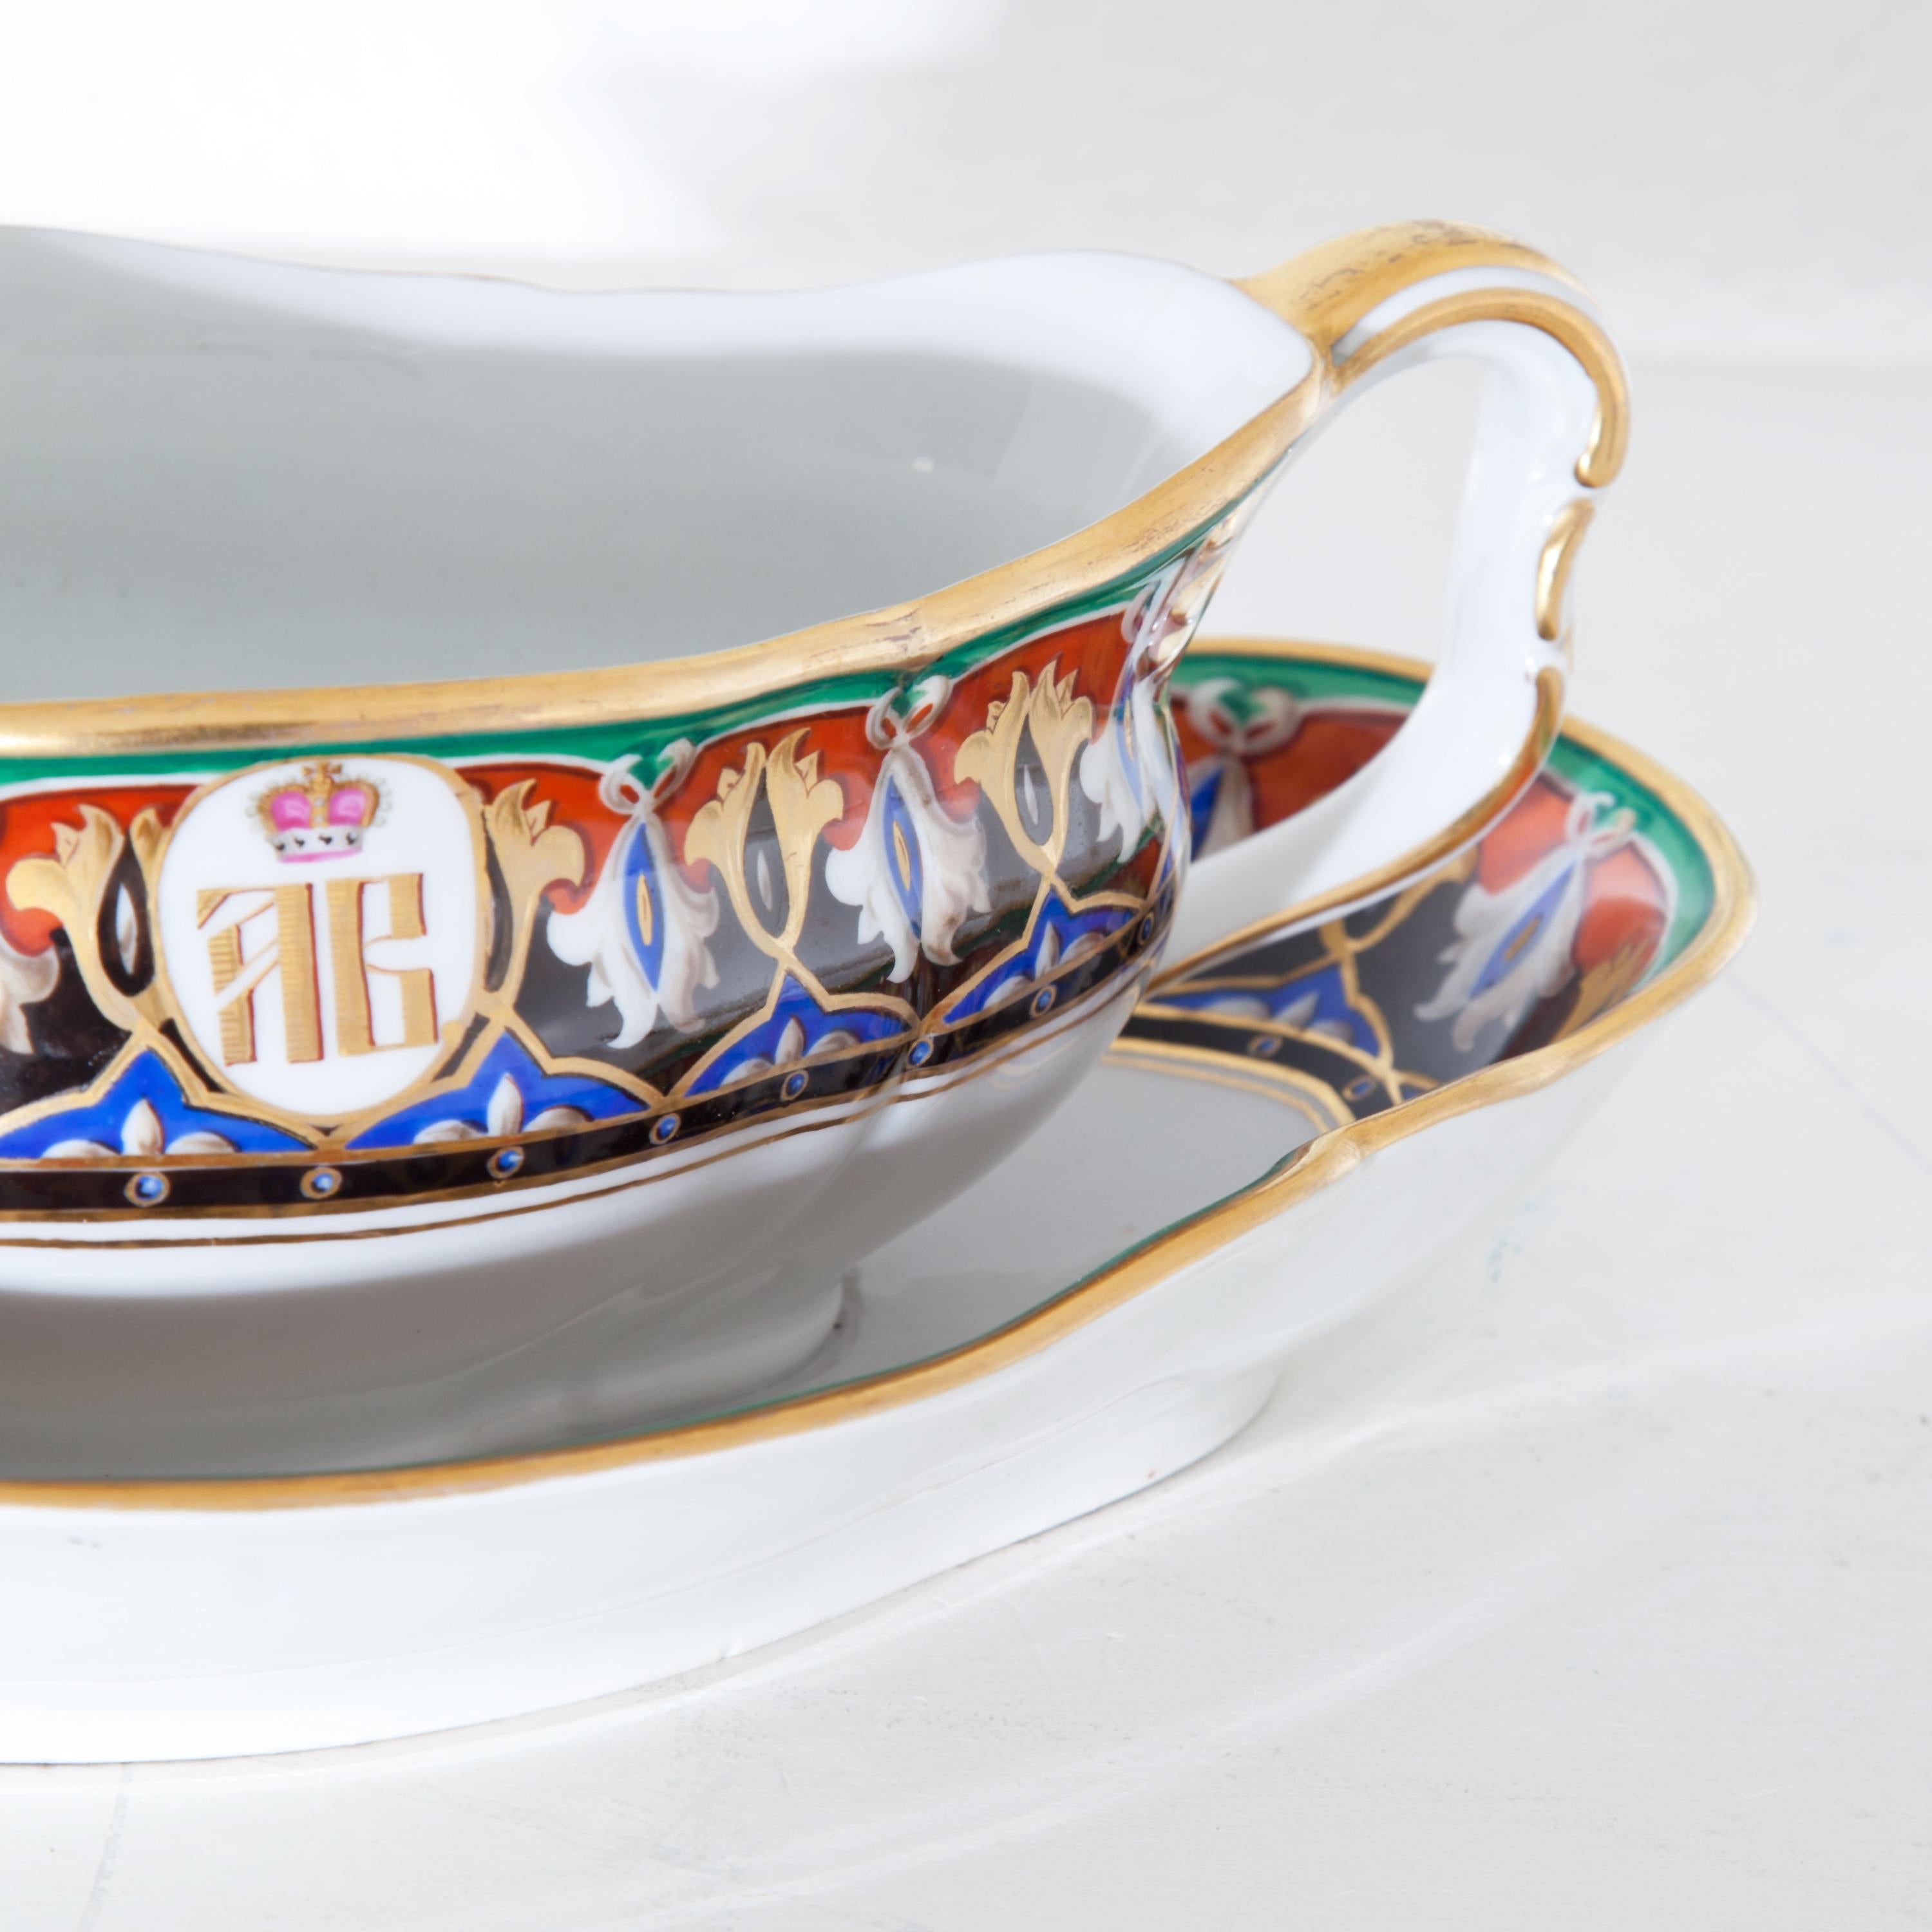 Porcelain Gravy Boat and Spoon with Monogram WA, KPM, Berlin, Germany, 1849-1870 For Sale 5